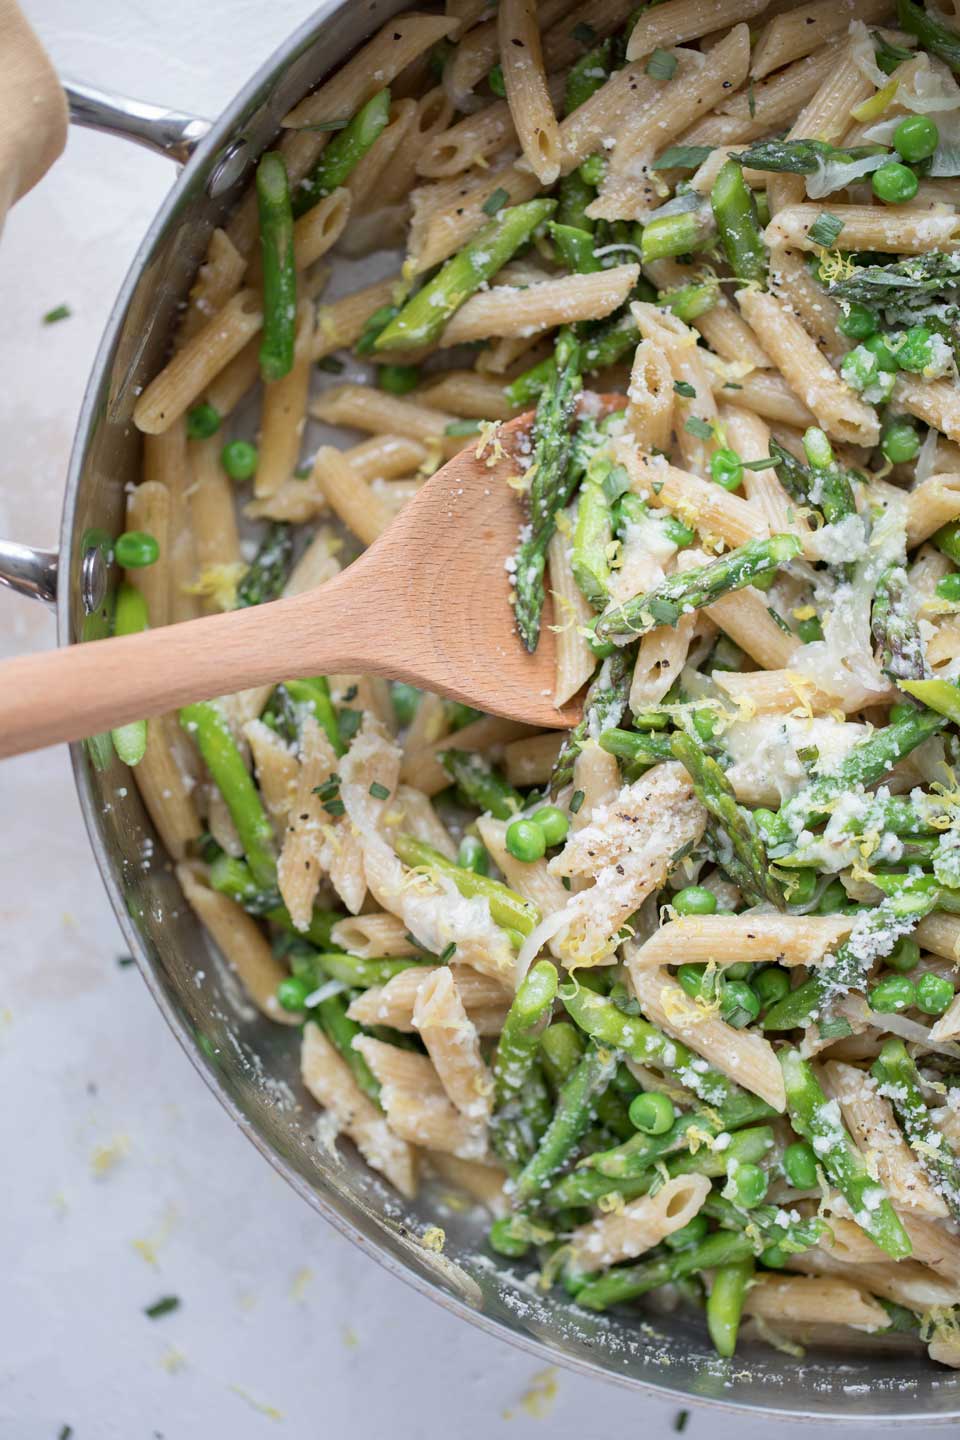 This scrumptious One-Pot Pasta features asparagus, peas, parmesan cheese, fresh tarragon and a double-hit of bright, lemony flavors! So fresh, yet such true comfort food!